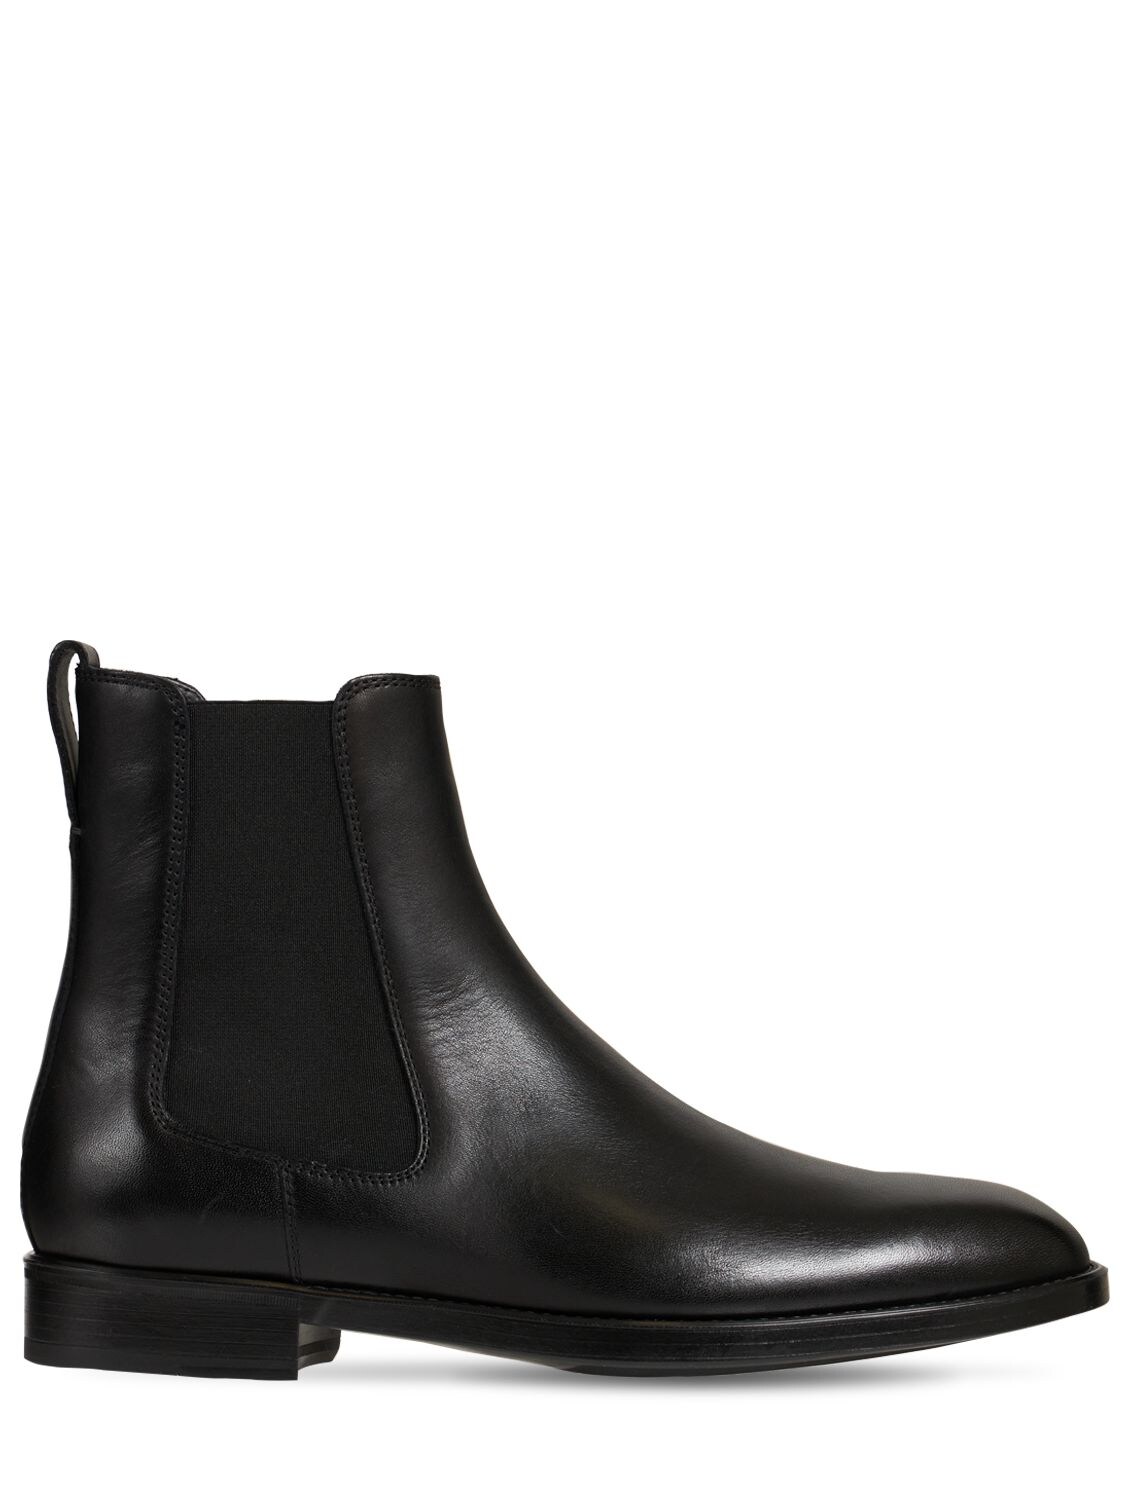 Tom Ford - Leather ankle boots - Black | Luisaviaroma